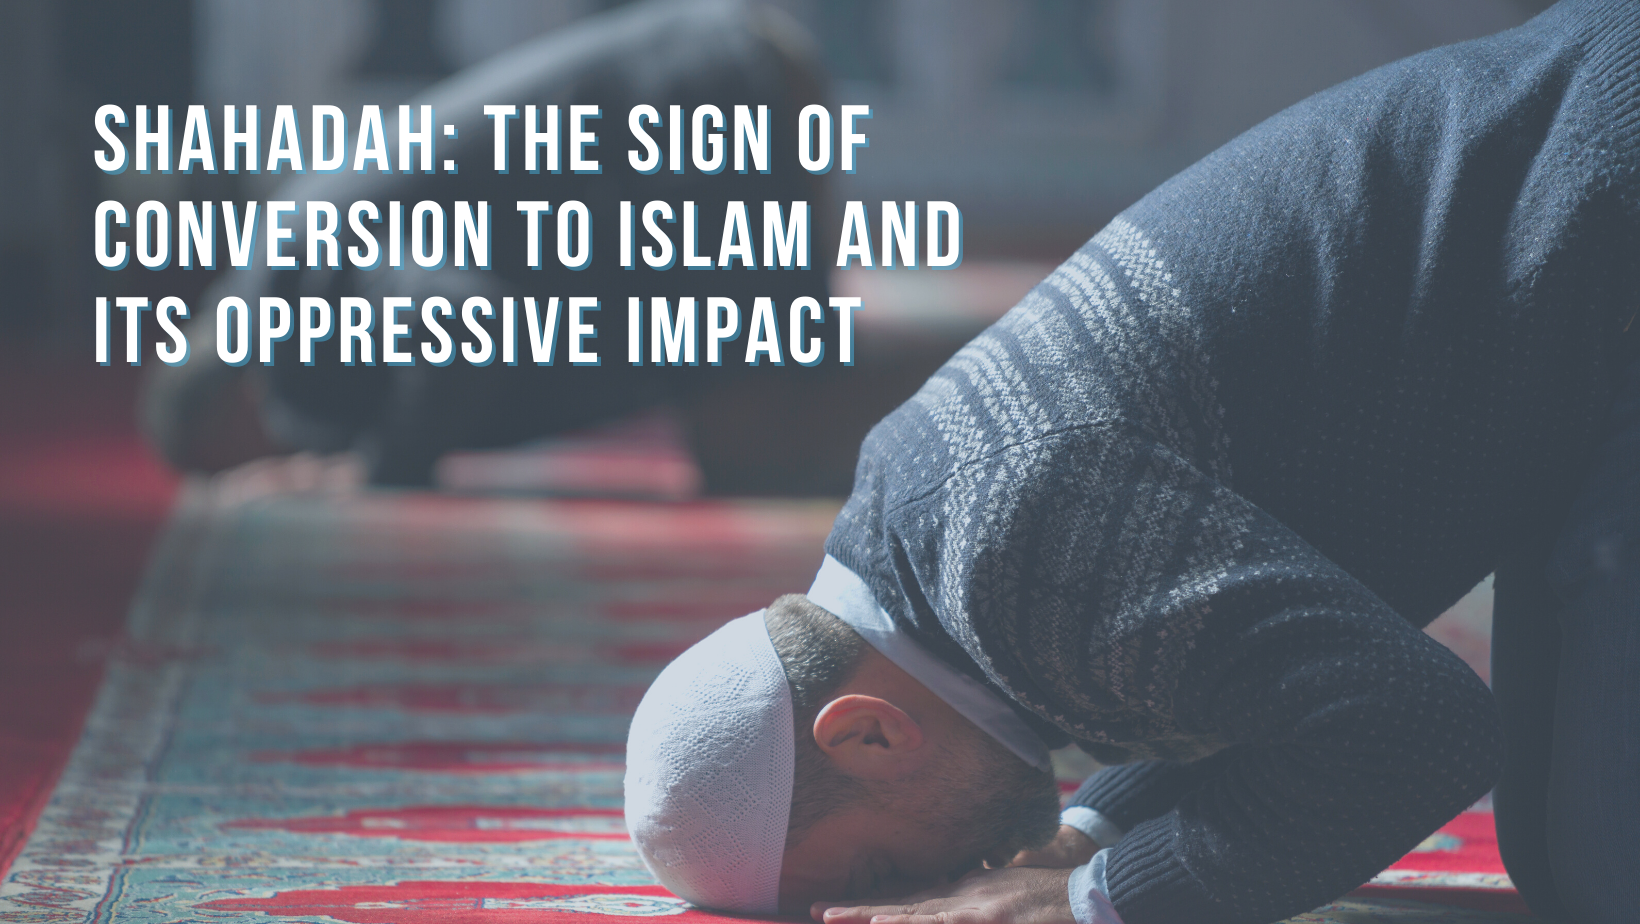 Shahadah: The sign of conversion to Islam and its oppressive impact